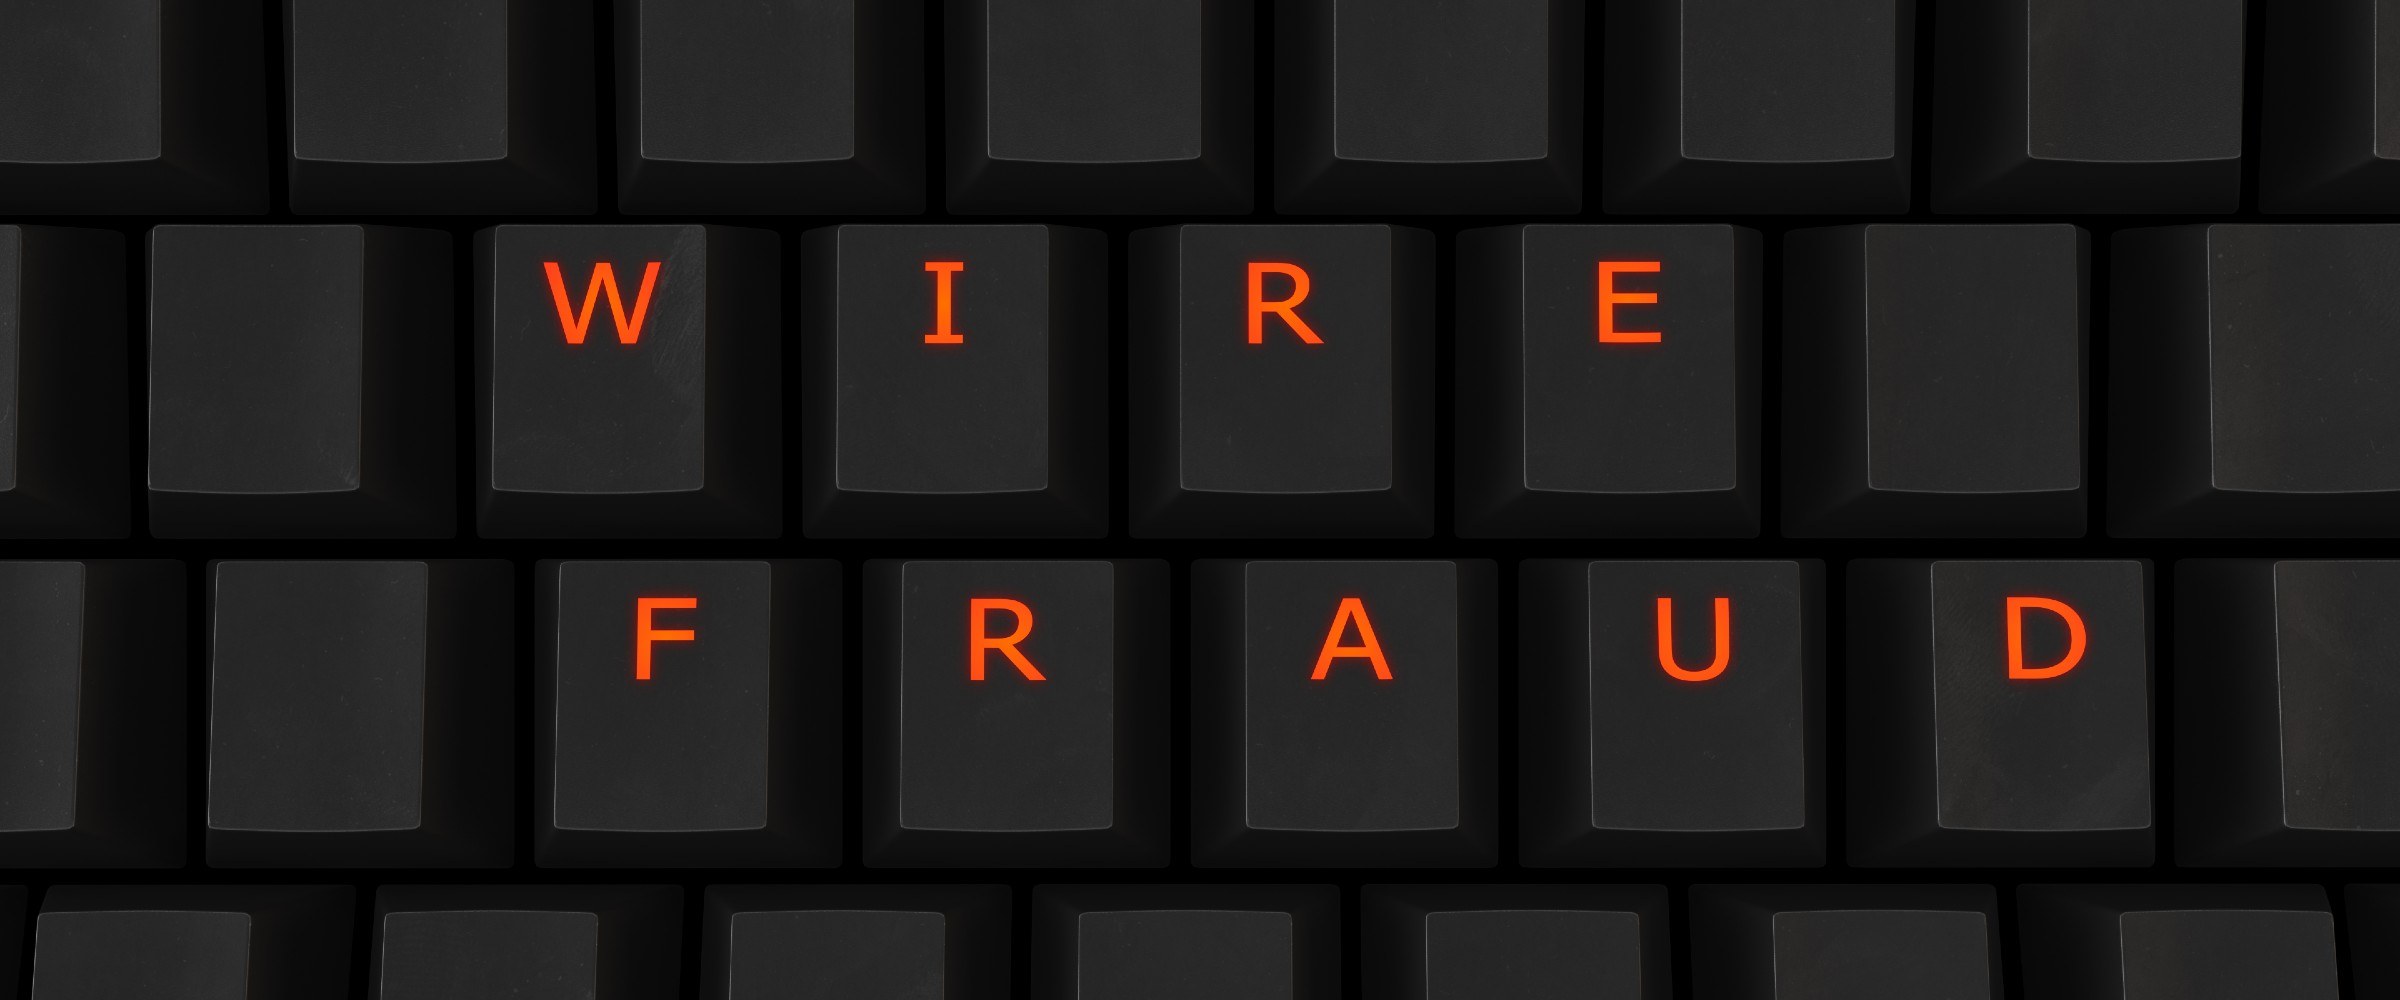 keyboard with wire fraud 